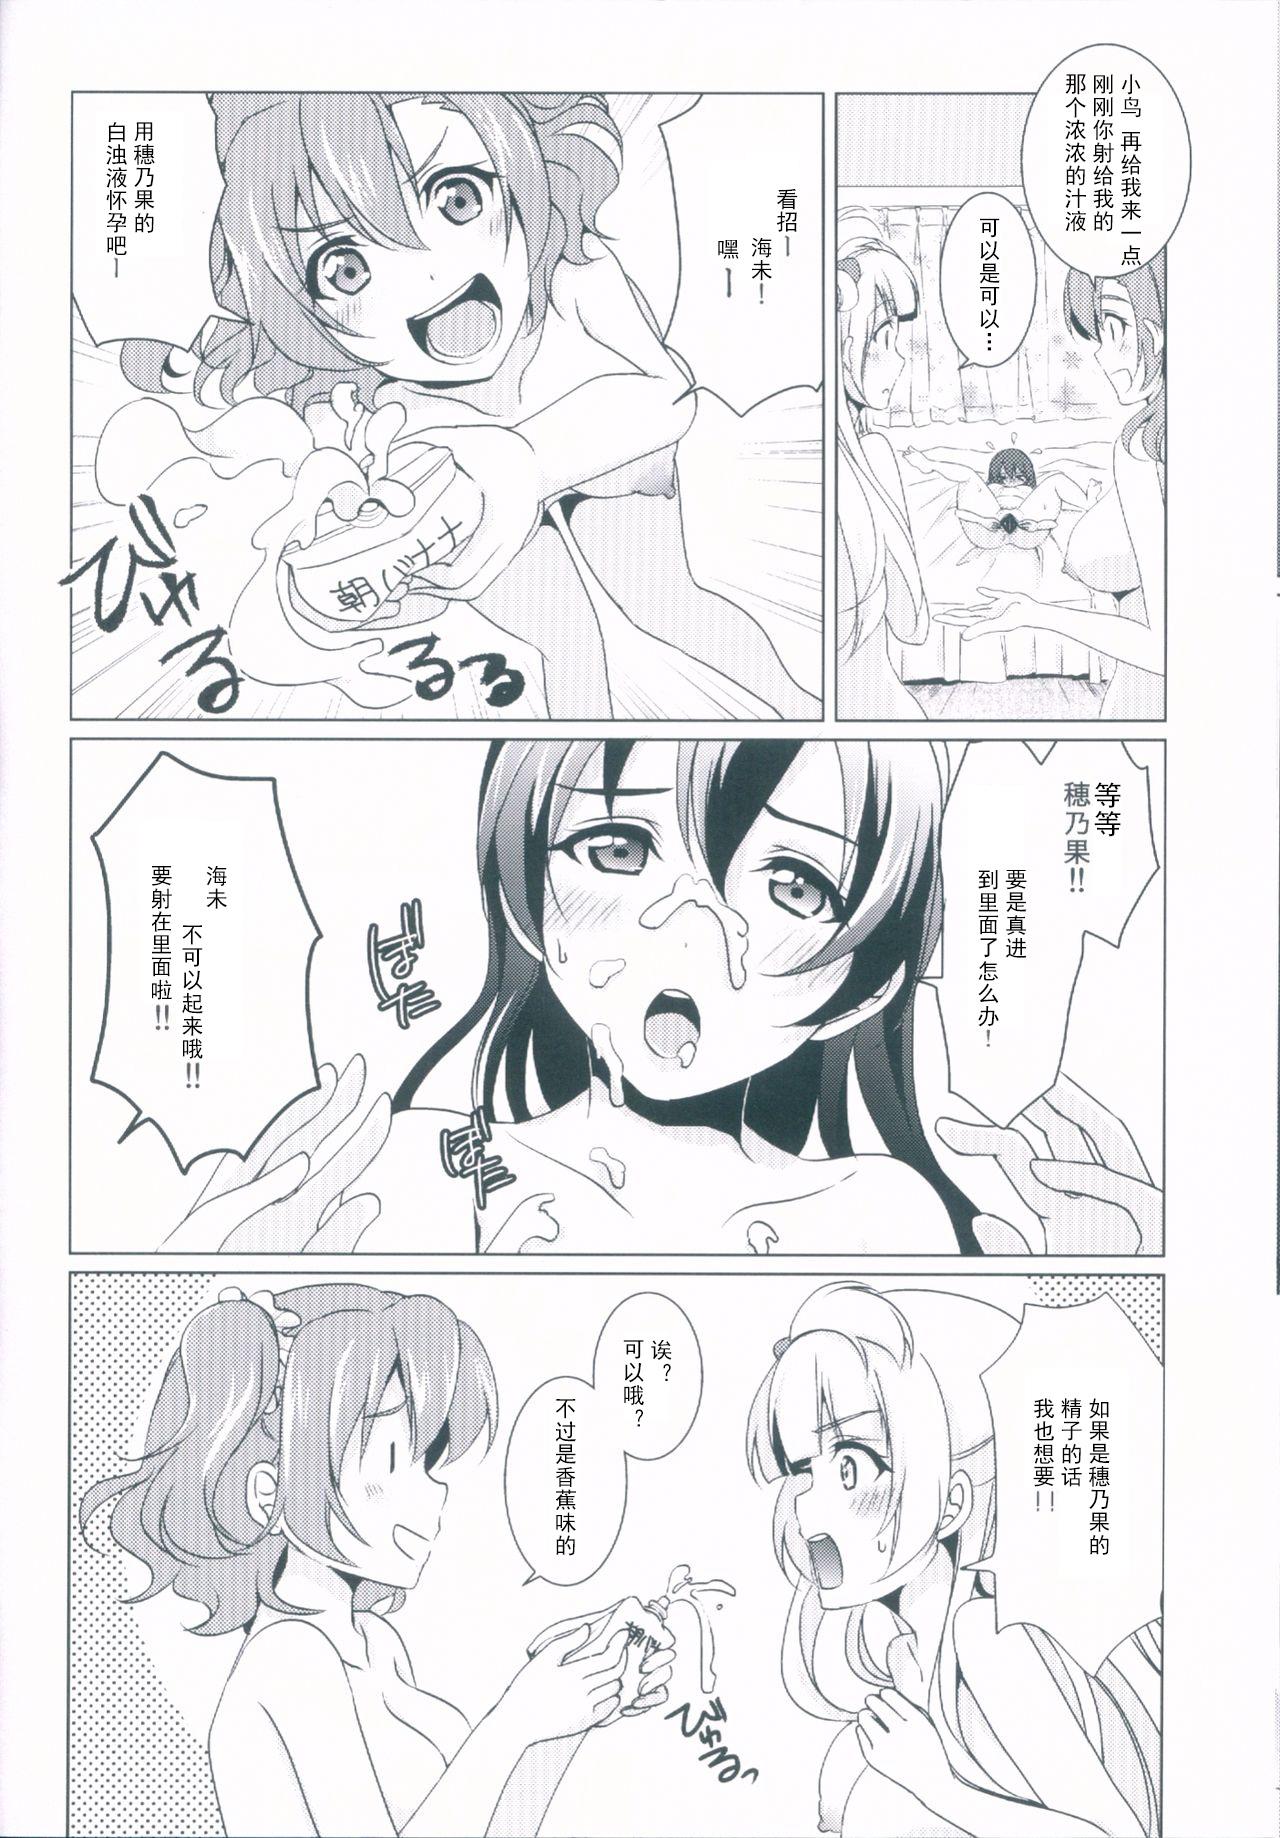 Young Tits honey*honey*days - Love live Chile - Page 25